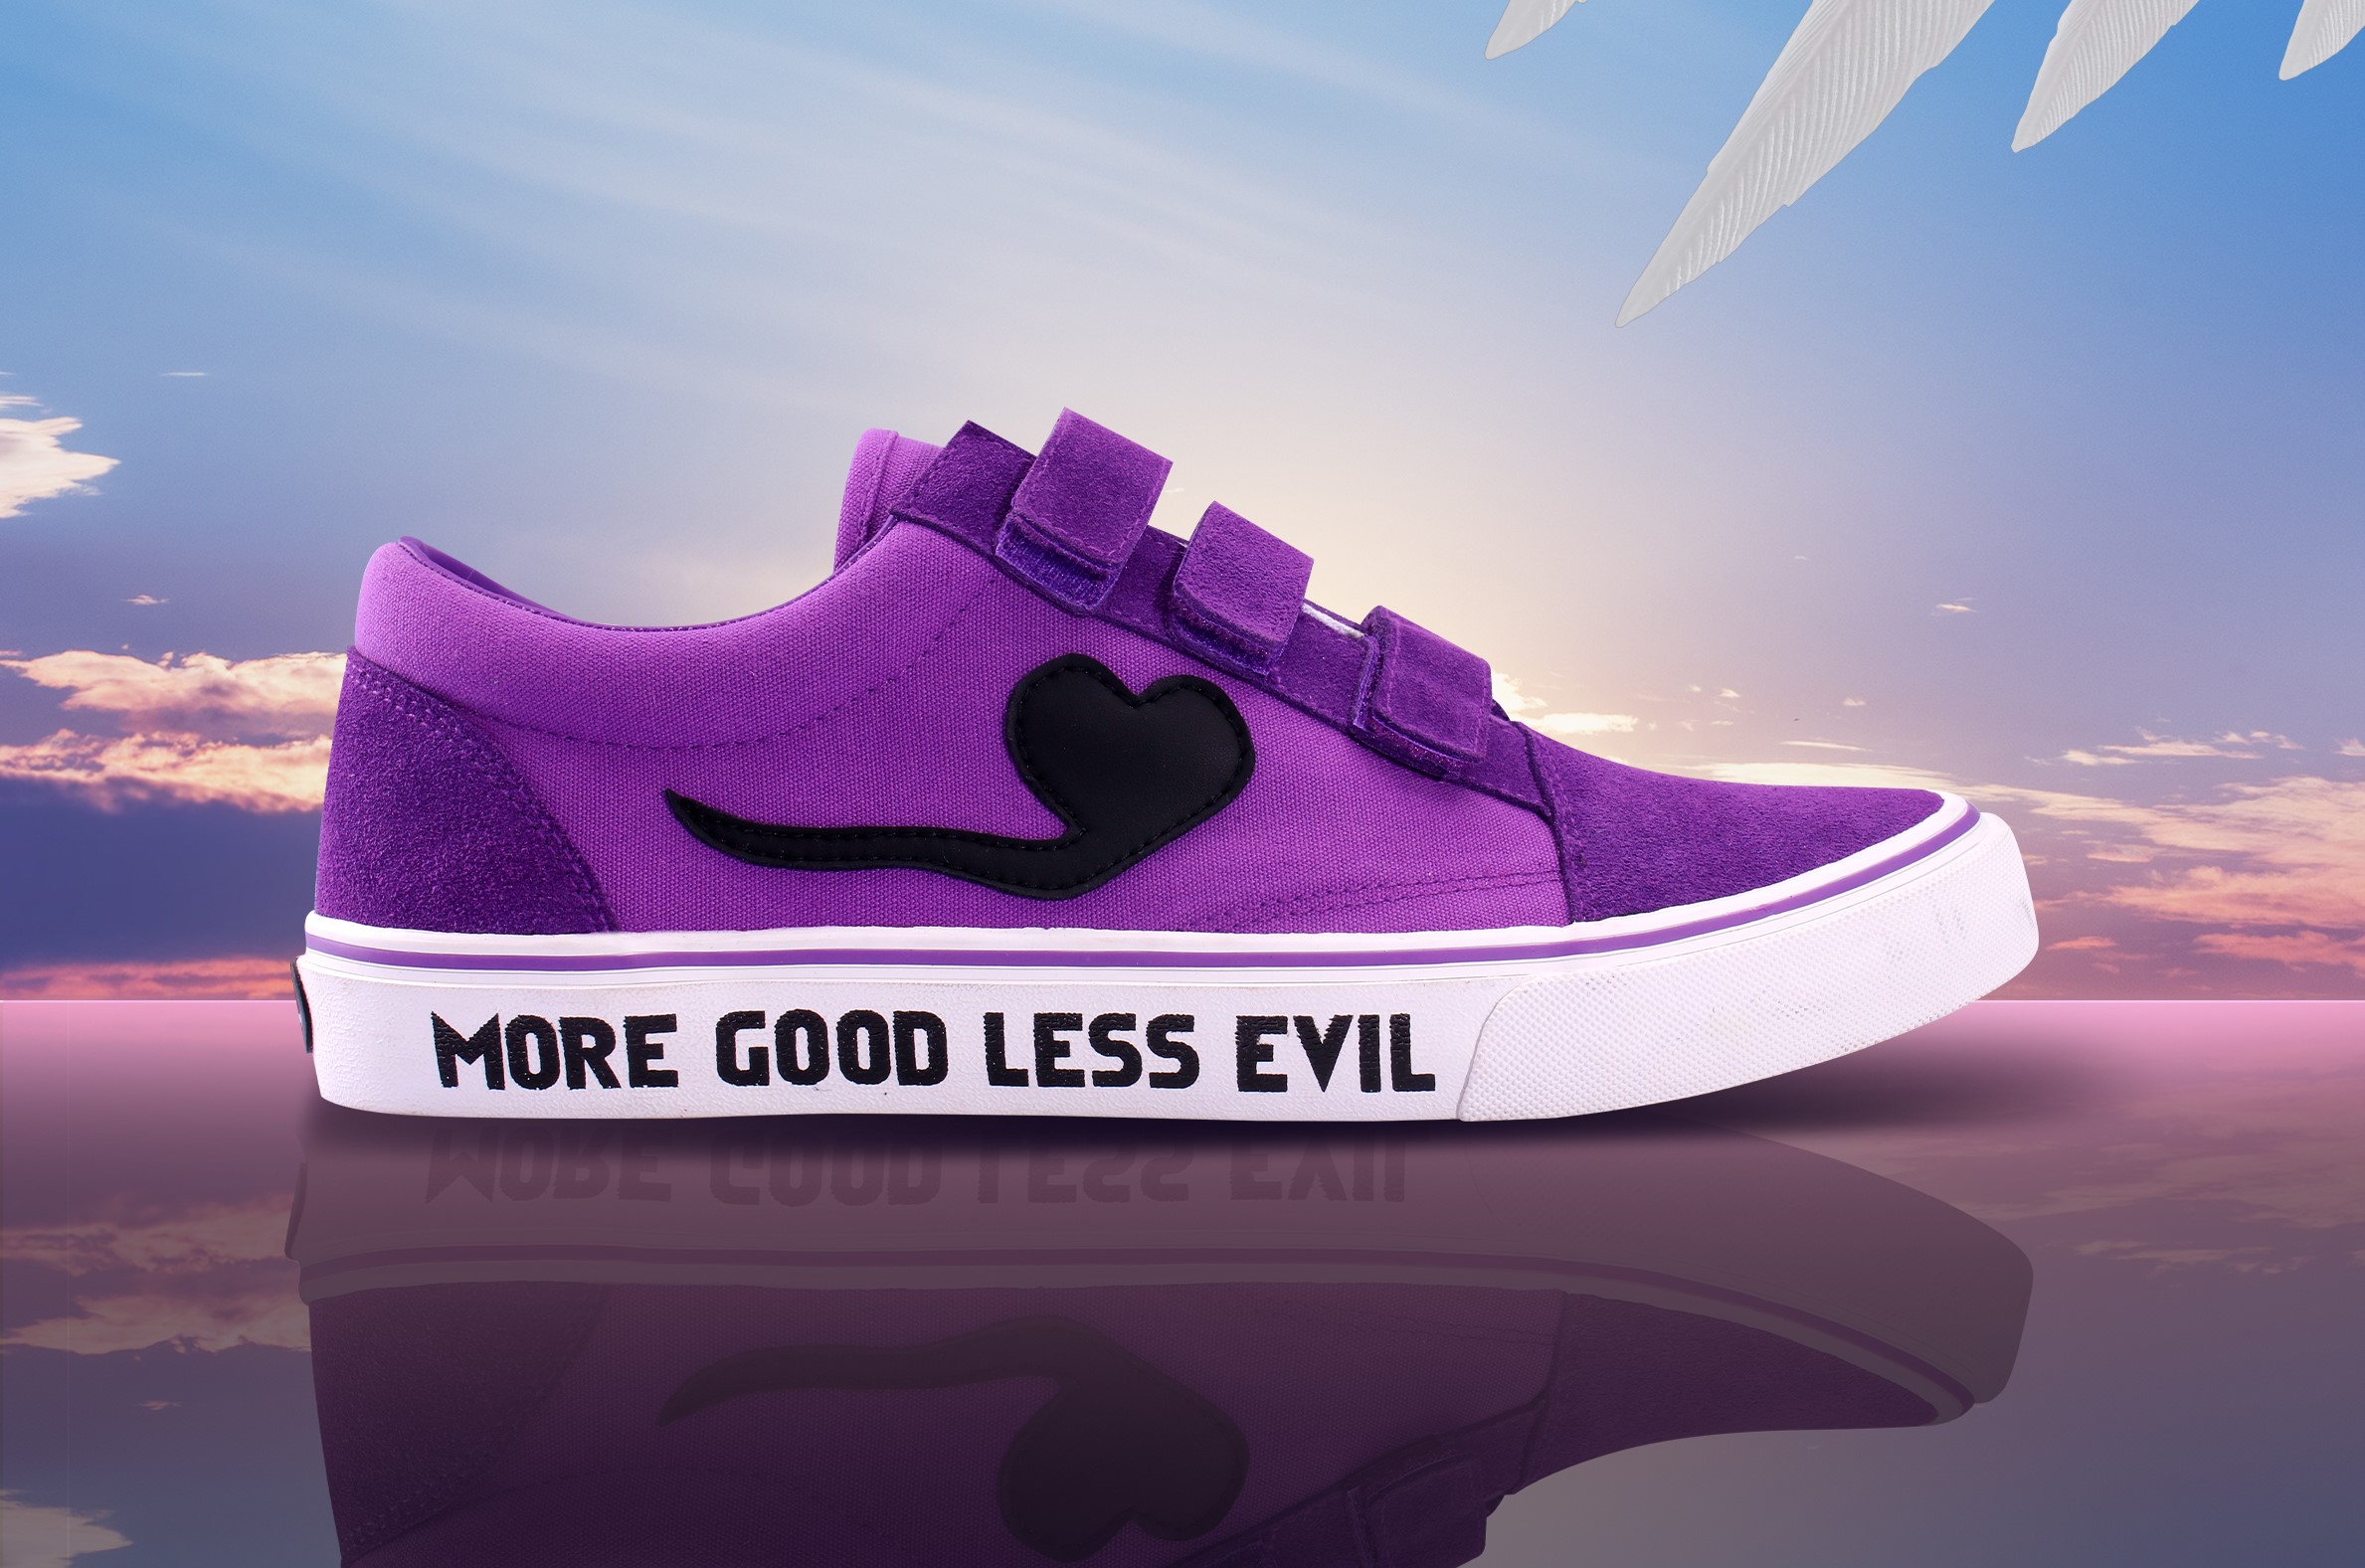 Affordable, limited edition “More Good Less Evil” sneaker by Secret Fresh x World Balance